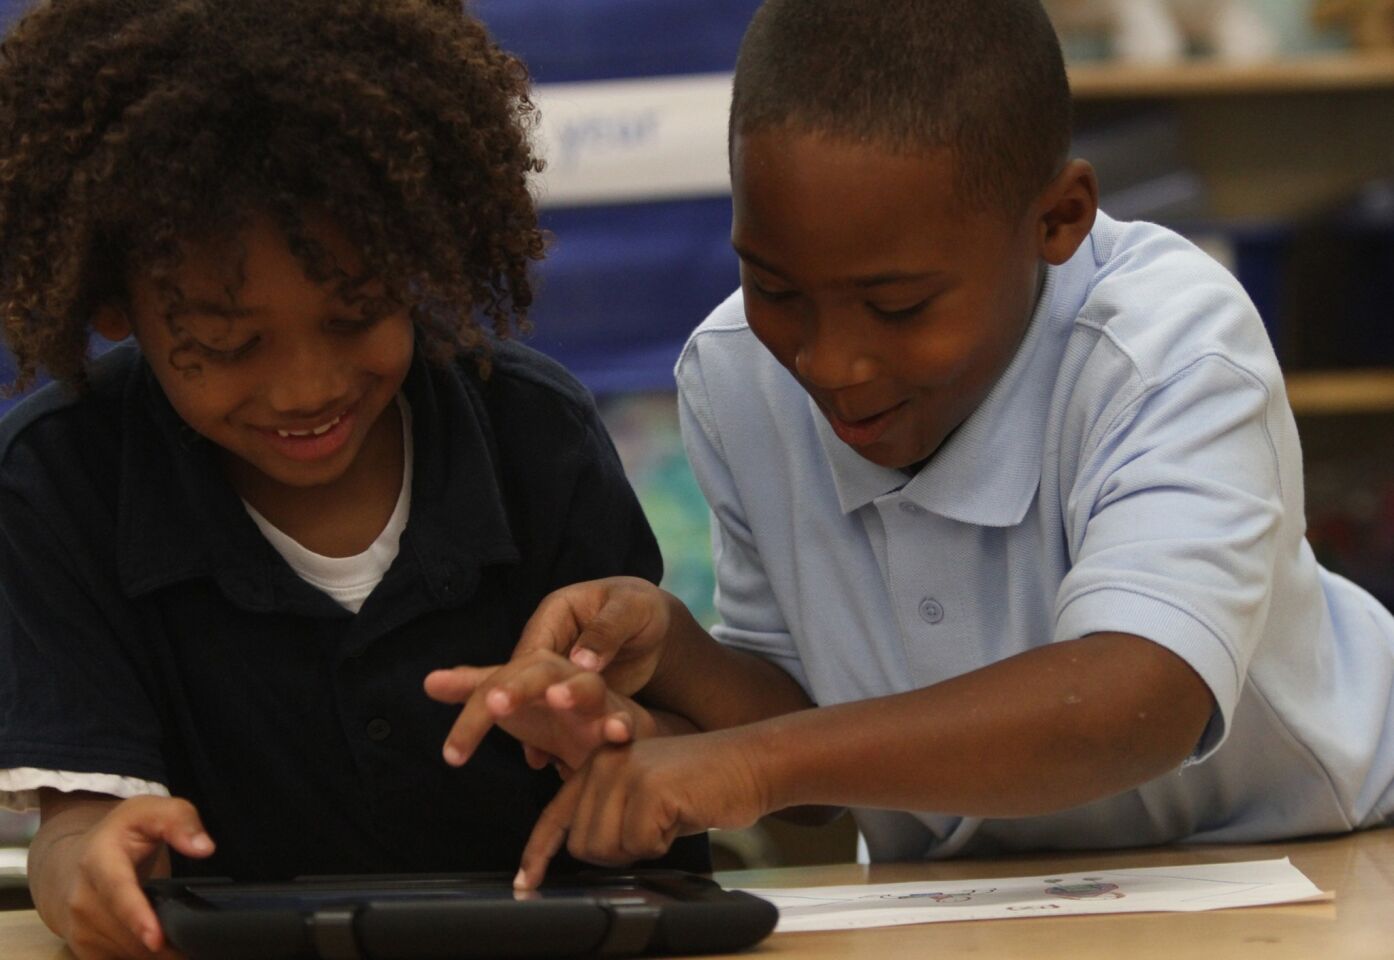 King Shelton, left, and Zylan Giles work with their new iPads at Broadacres Avenue Elementary School in Carson.